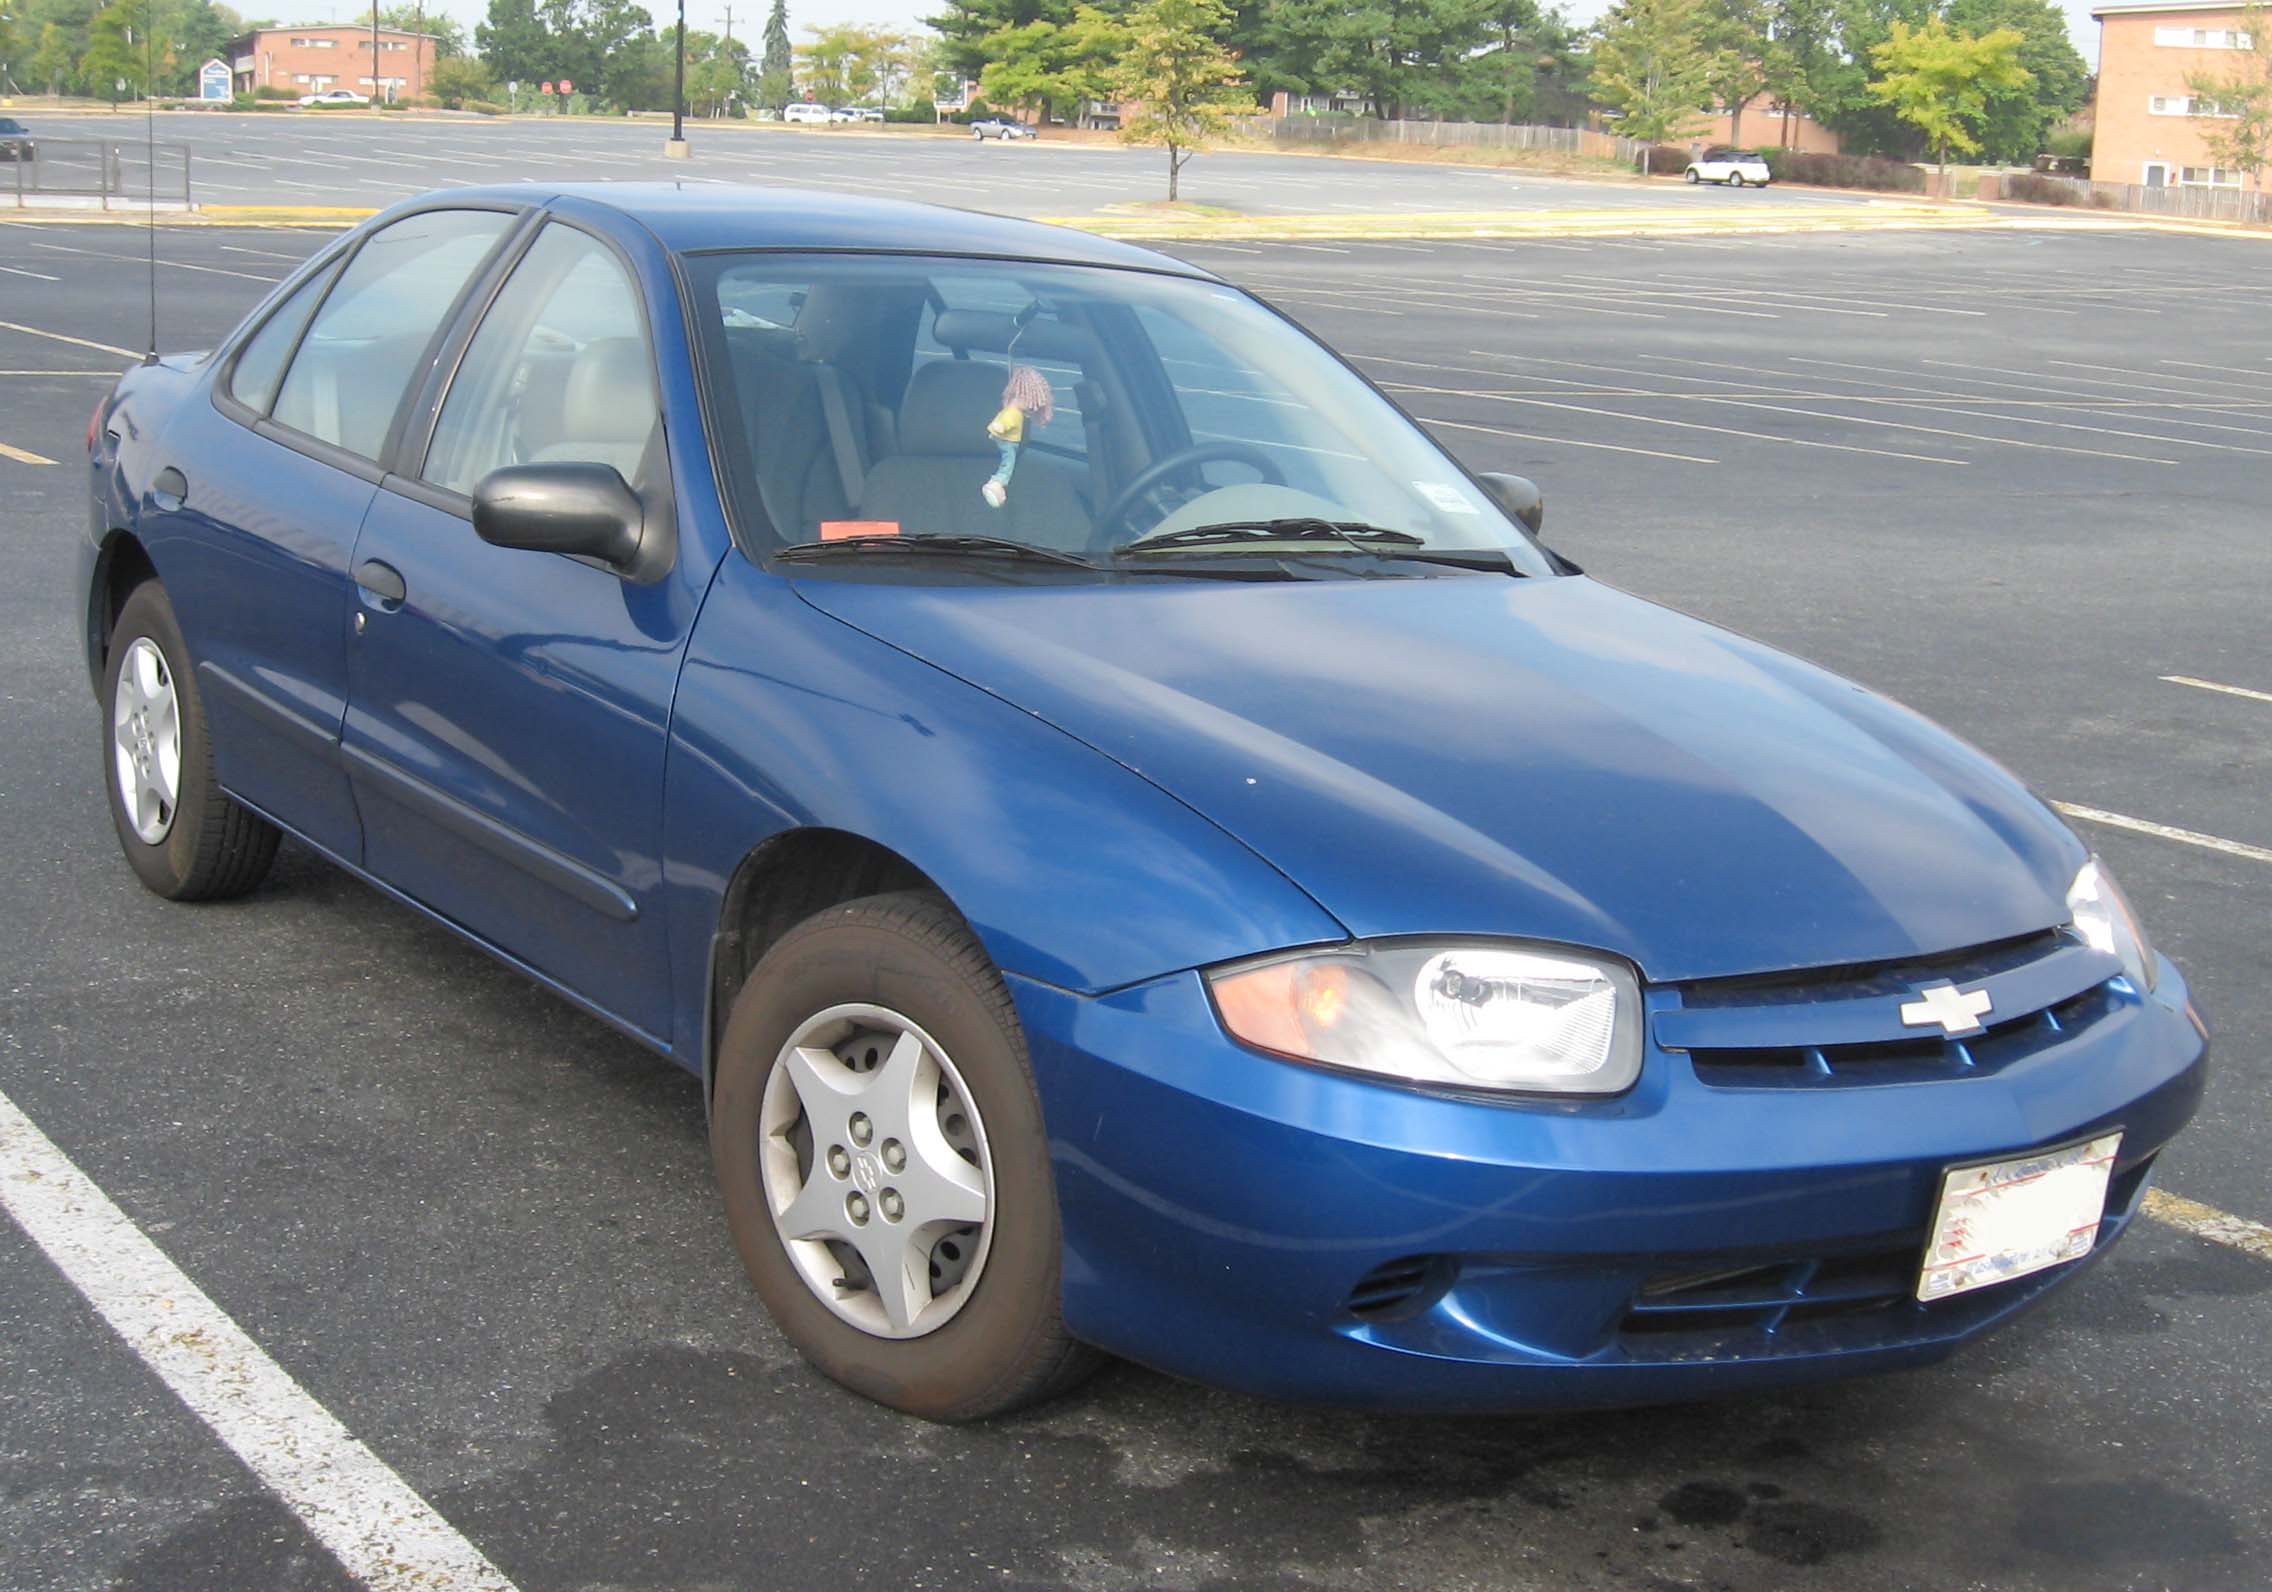 05 2005 Chevrolet Cavalier owners manual 